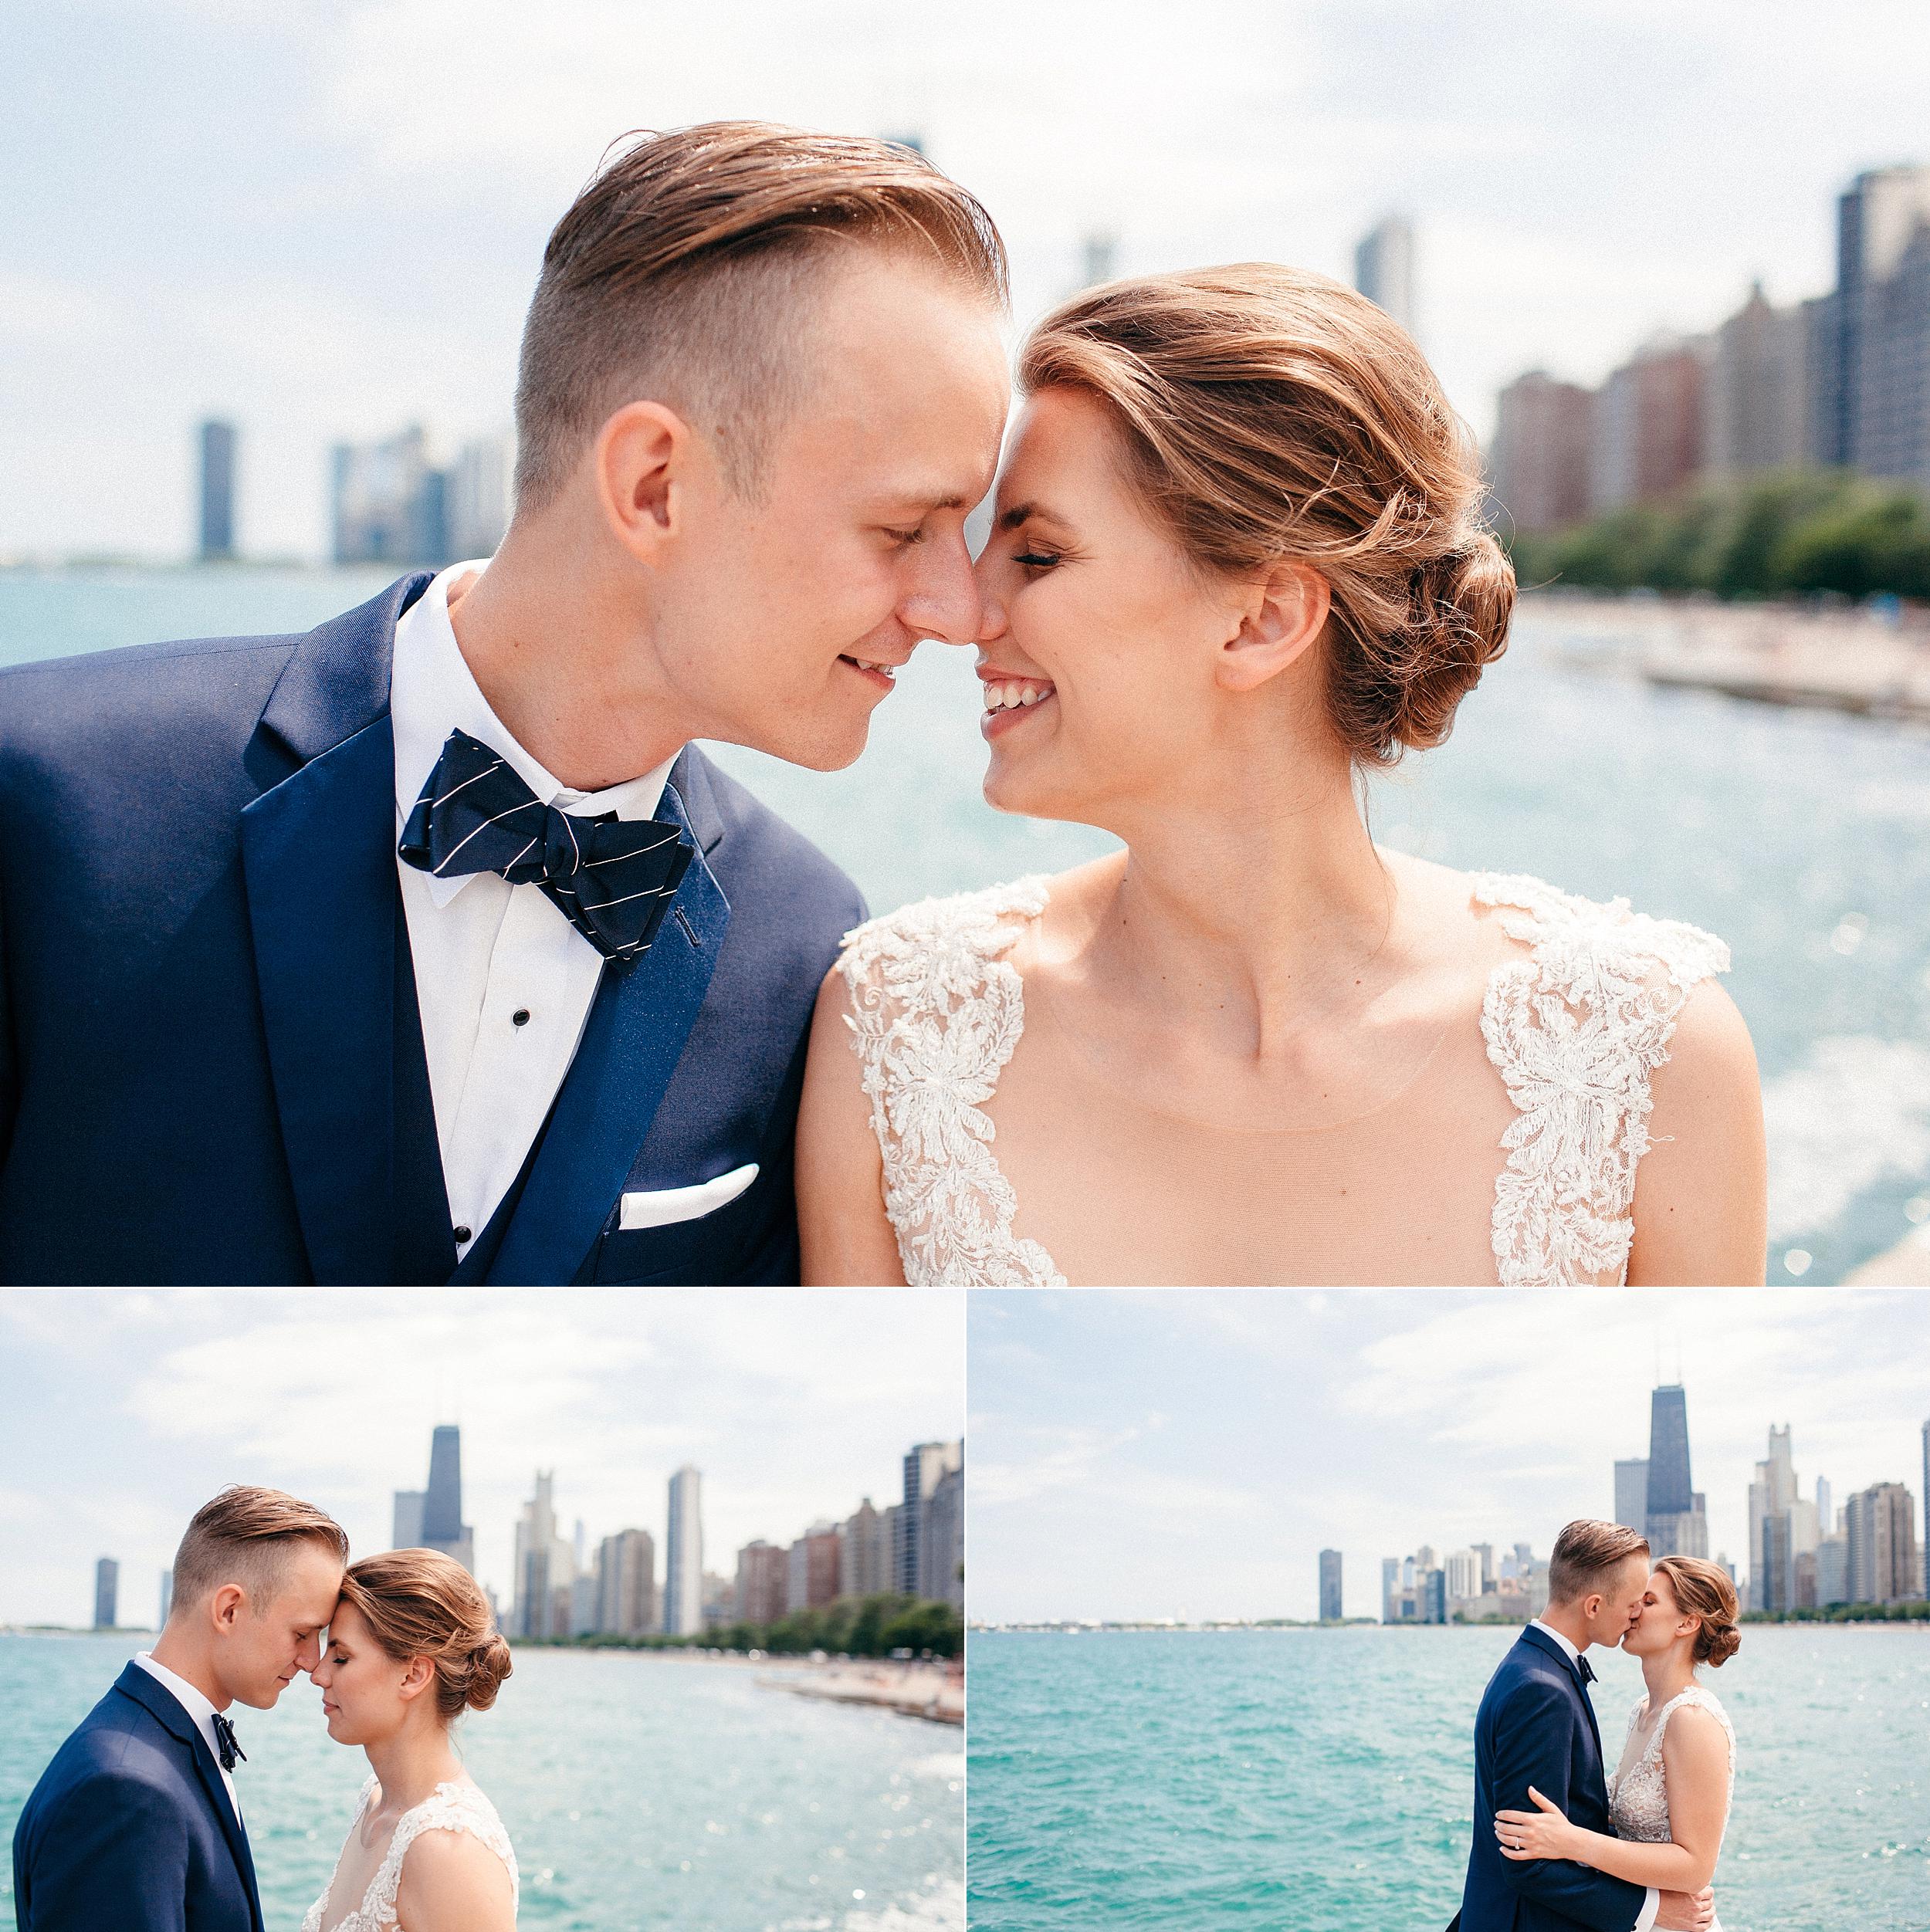  Small Downtown Chicago Floral Shop Wedding 